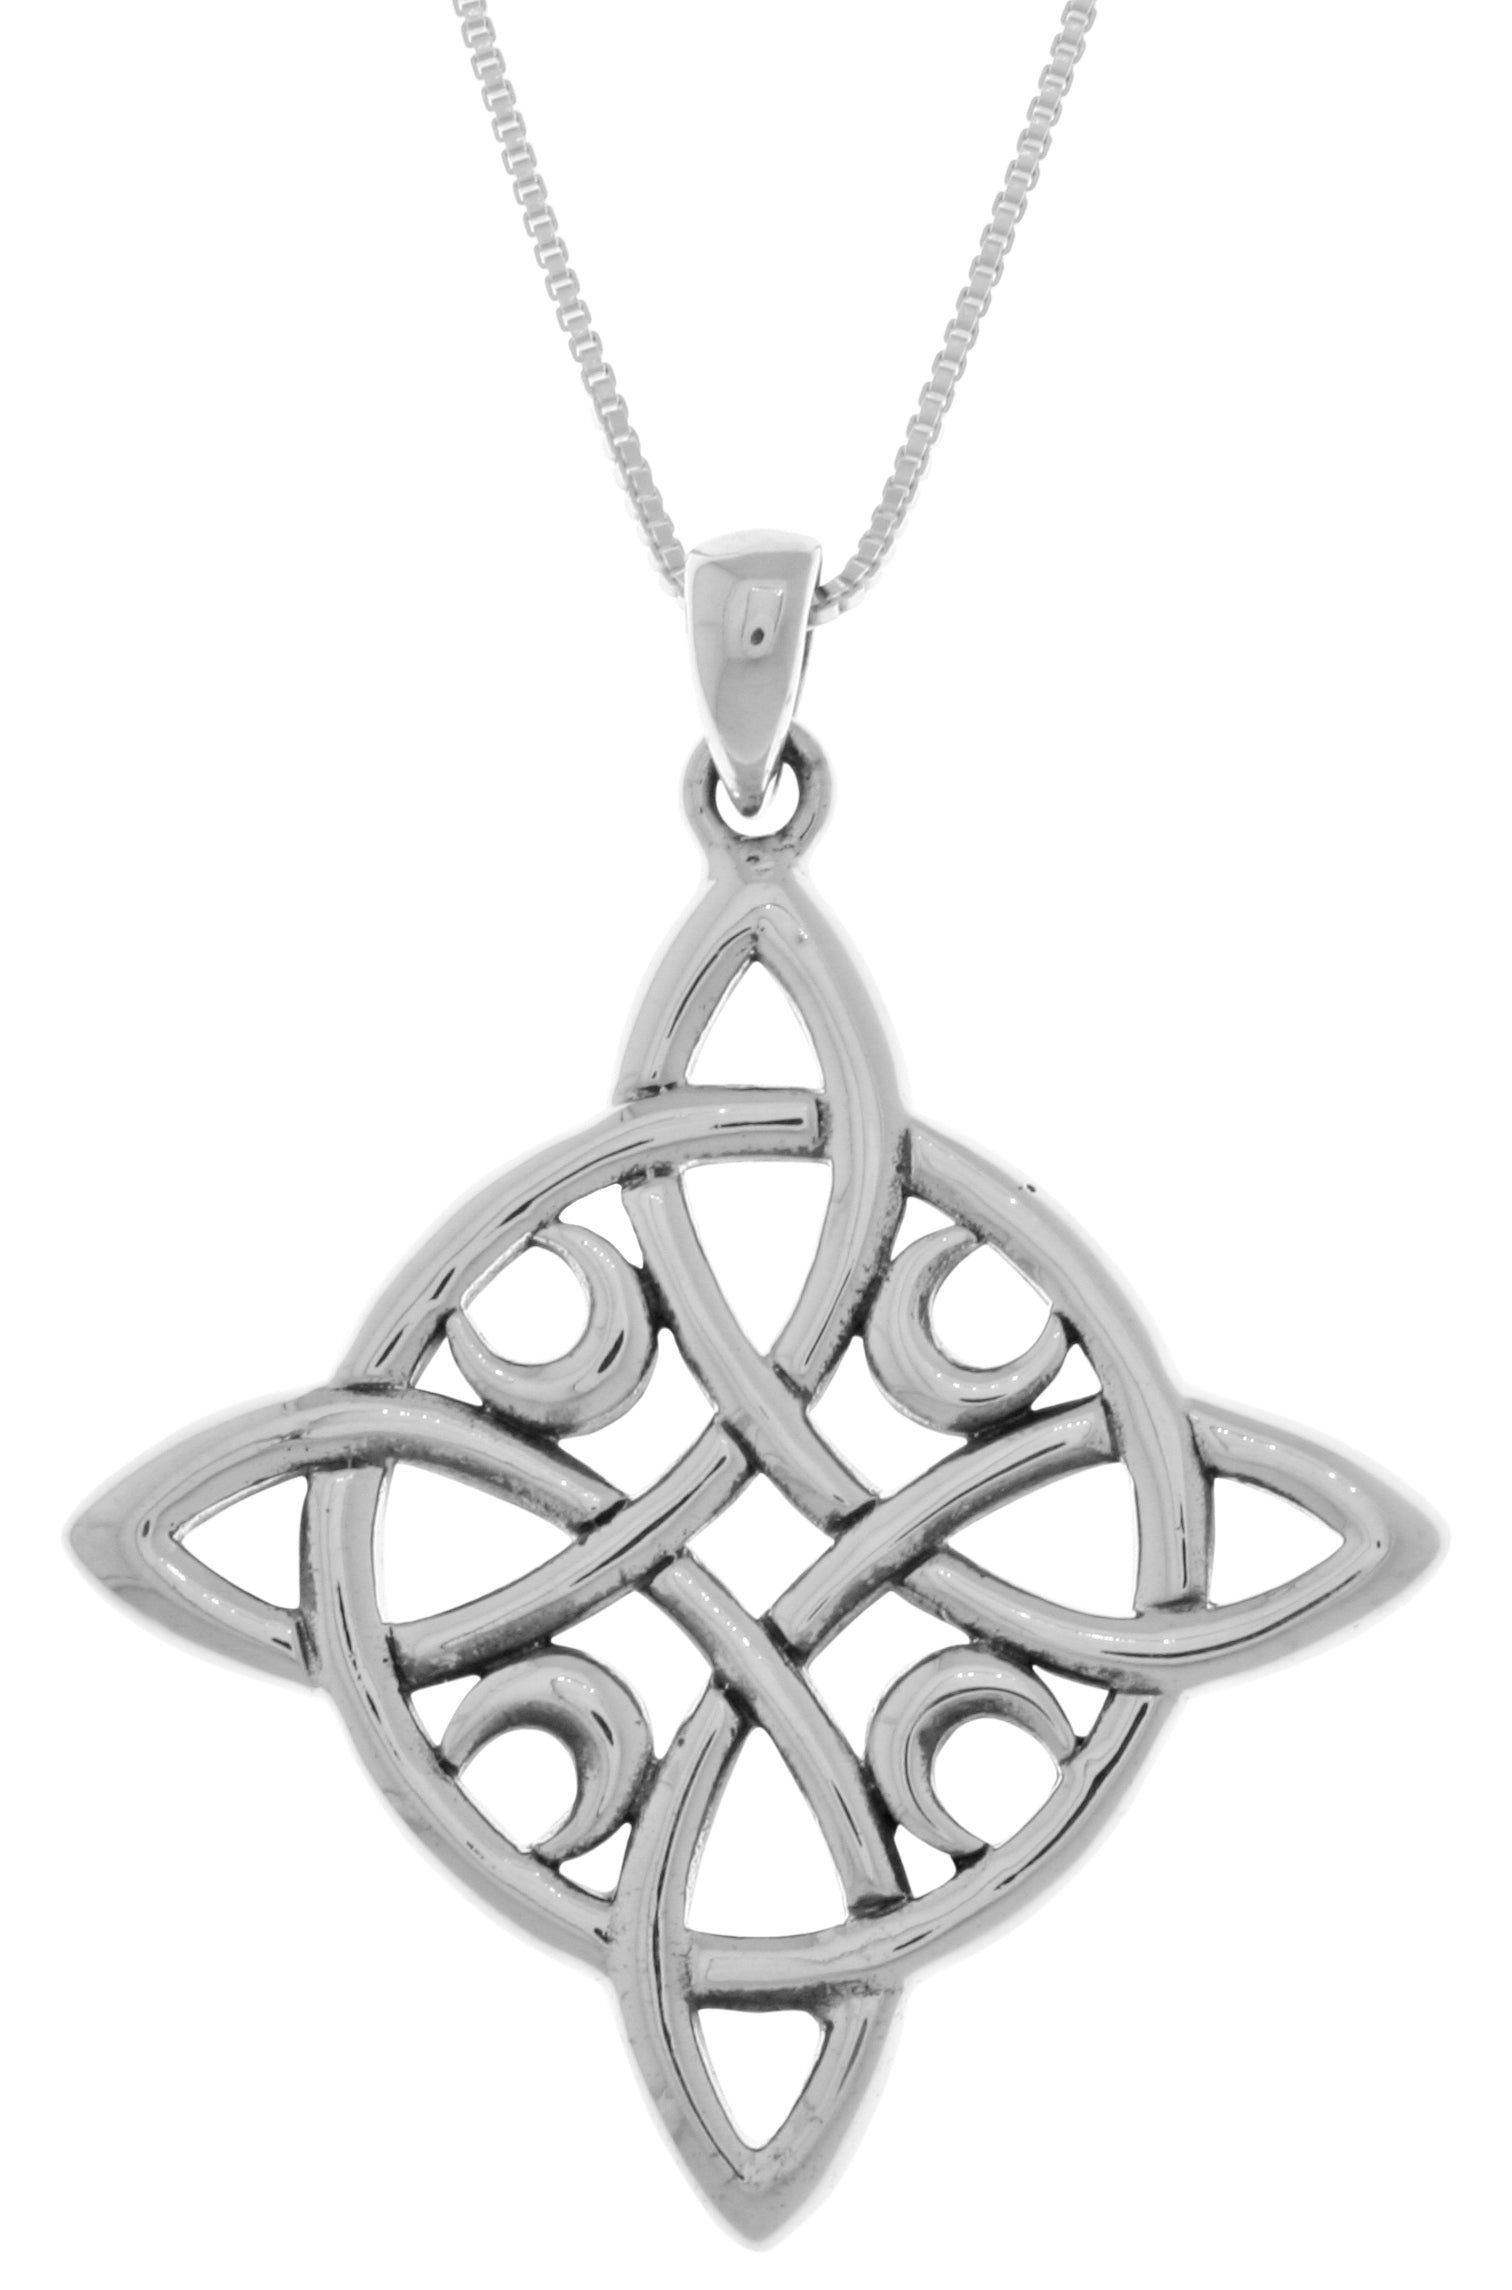 Jewelry Trends Sterling Silver Celtic Quaternary Moon Luck Knot Pendant on 18 Inch Box Chain Necklace